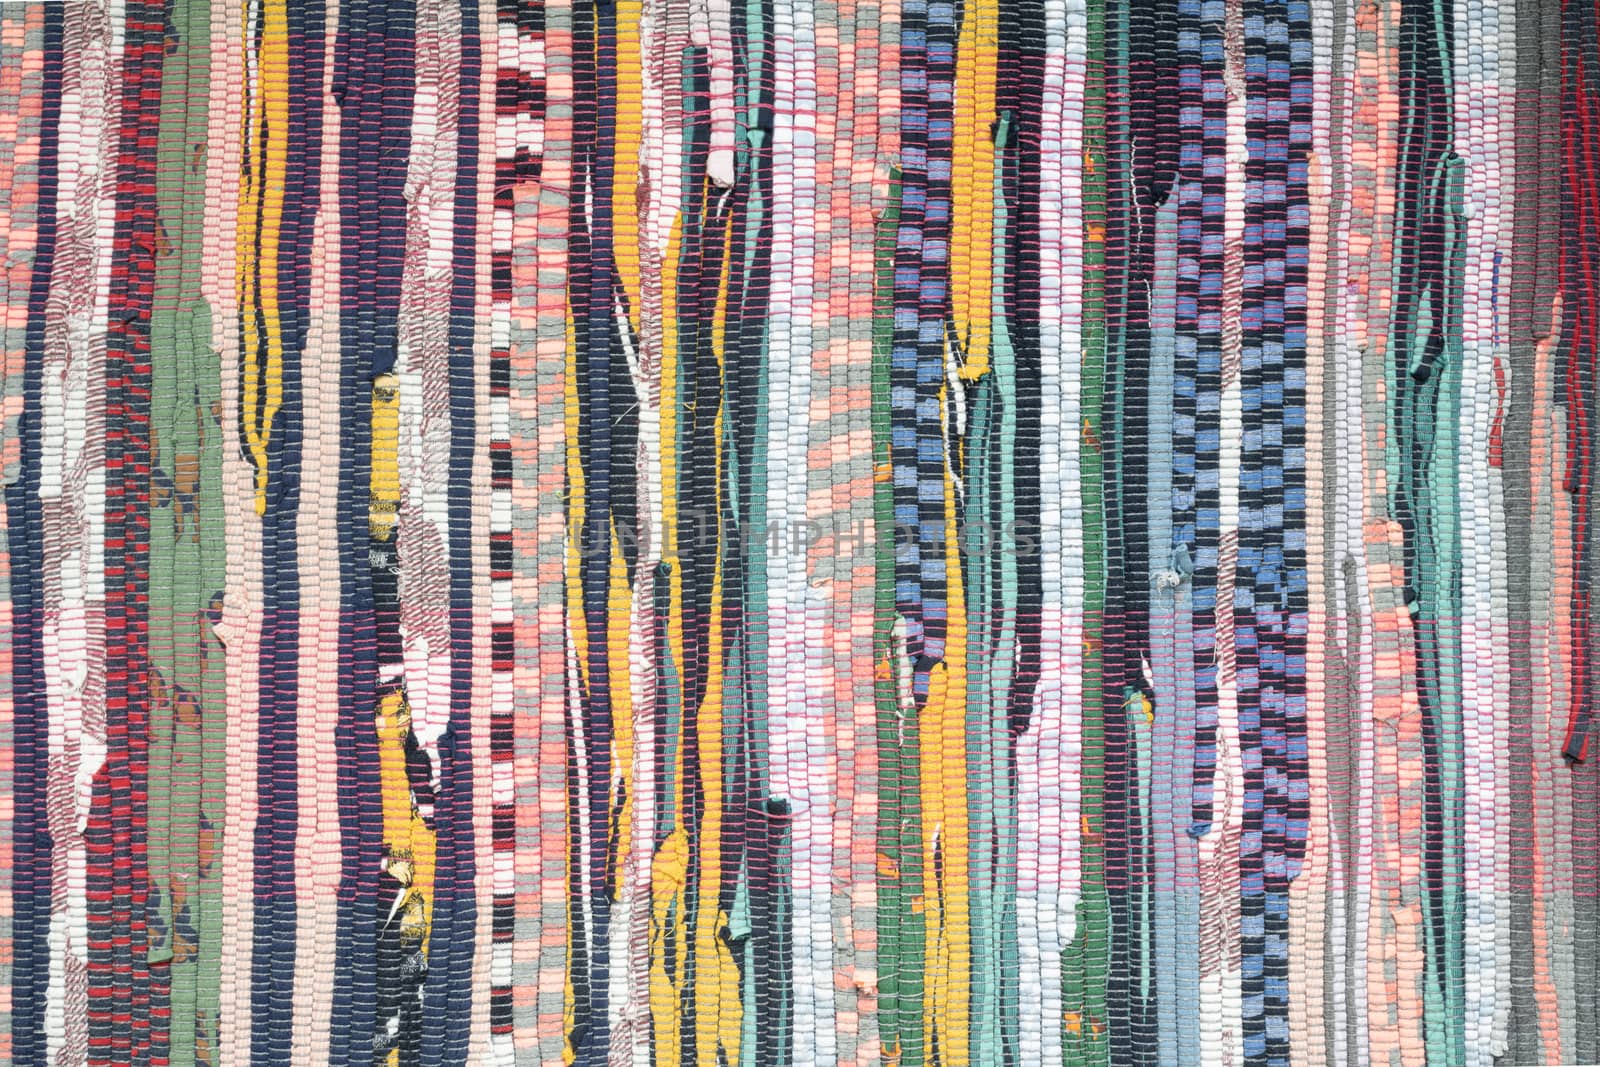 Fabric scraps, old clothing and textiles are cut into strips and grouped together, forming diagonal rows of disheveled pieces of cloth. Closeup design resembles an up-cycled blanket, rug or pillow. by sashokddt